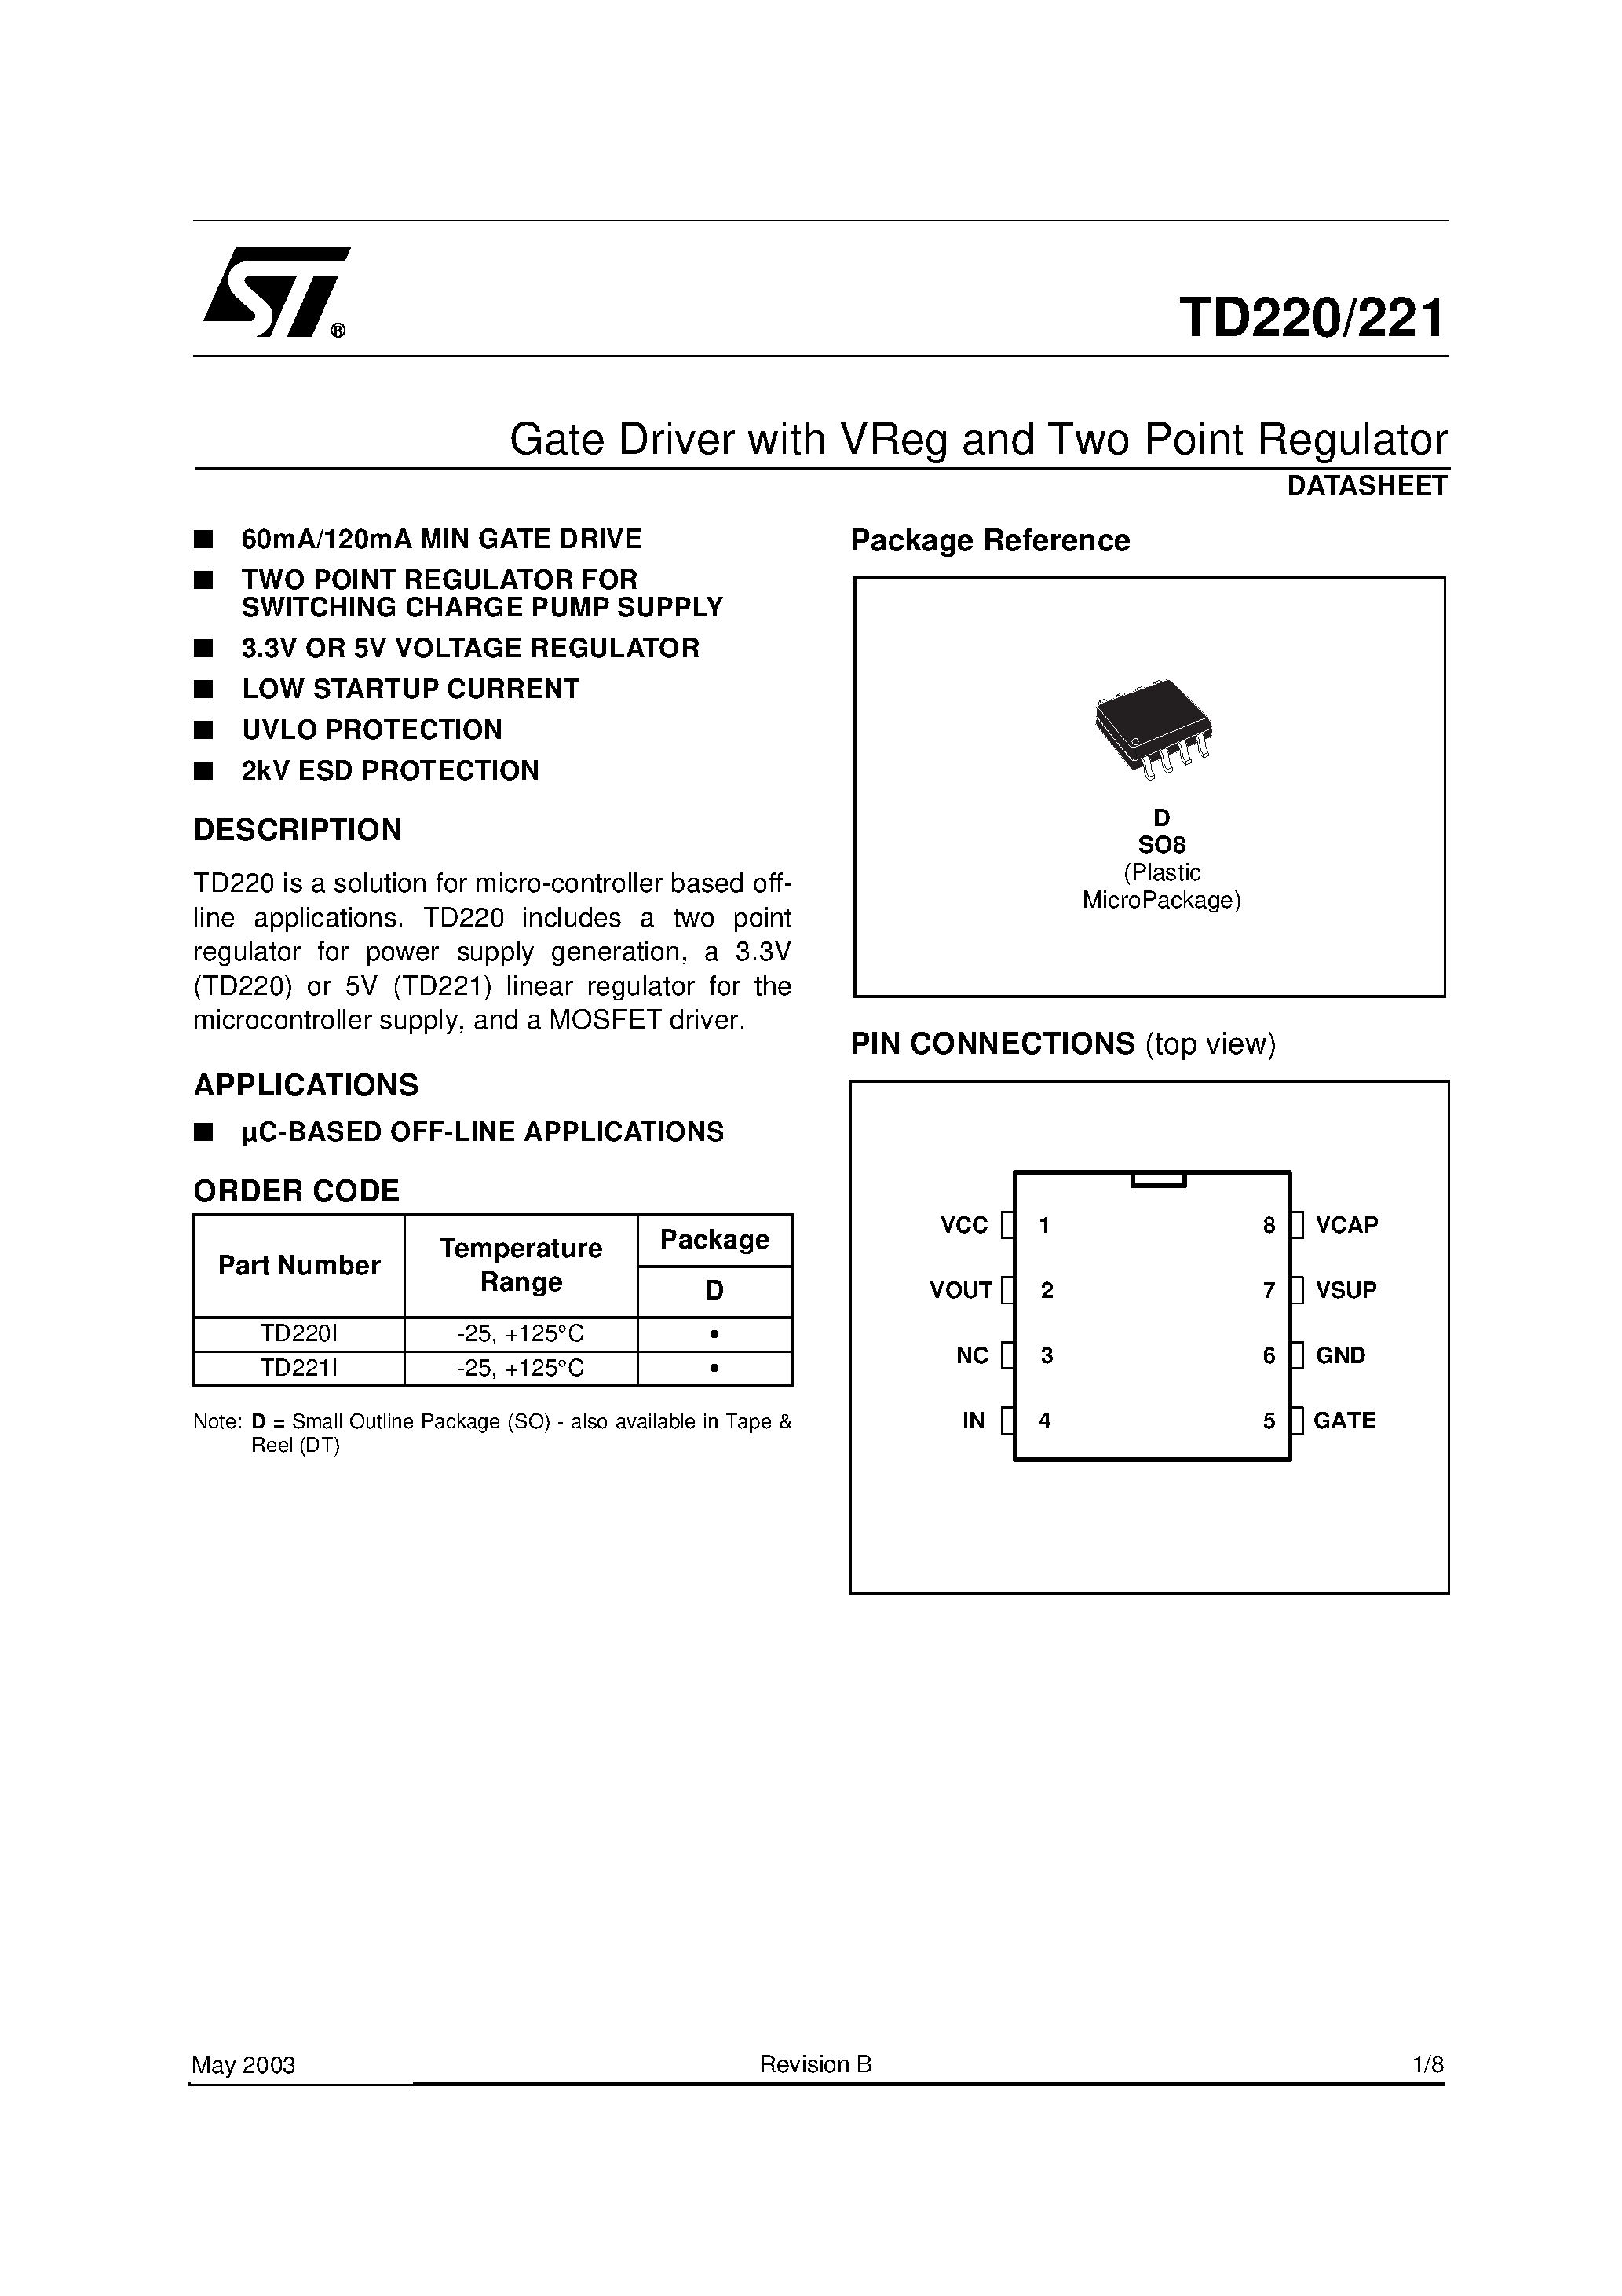 Datasheet TD220I - Gate Driver with VReg and Two Point Regulator page 1